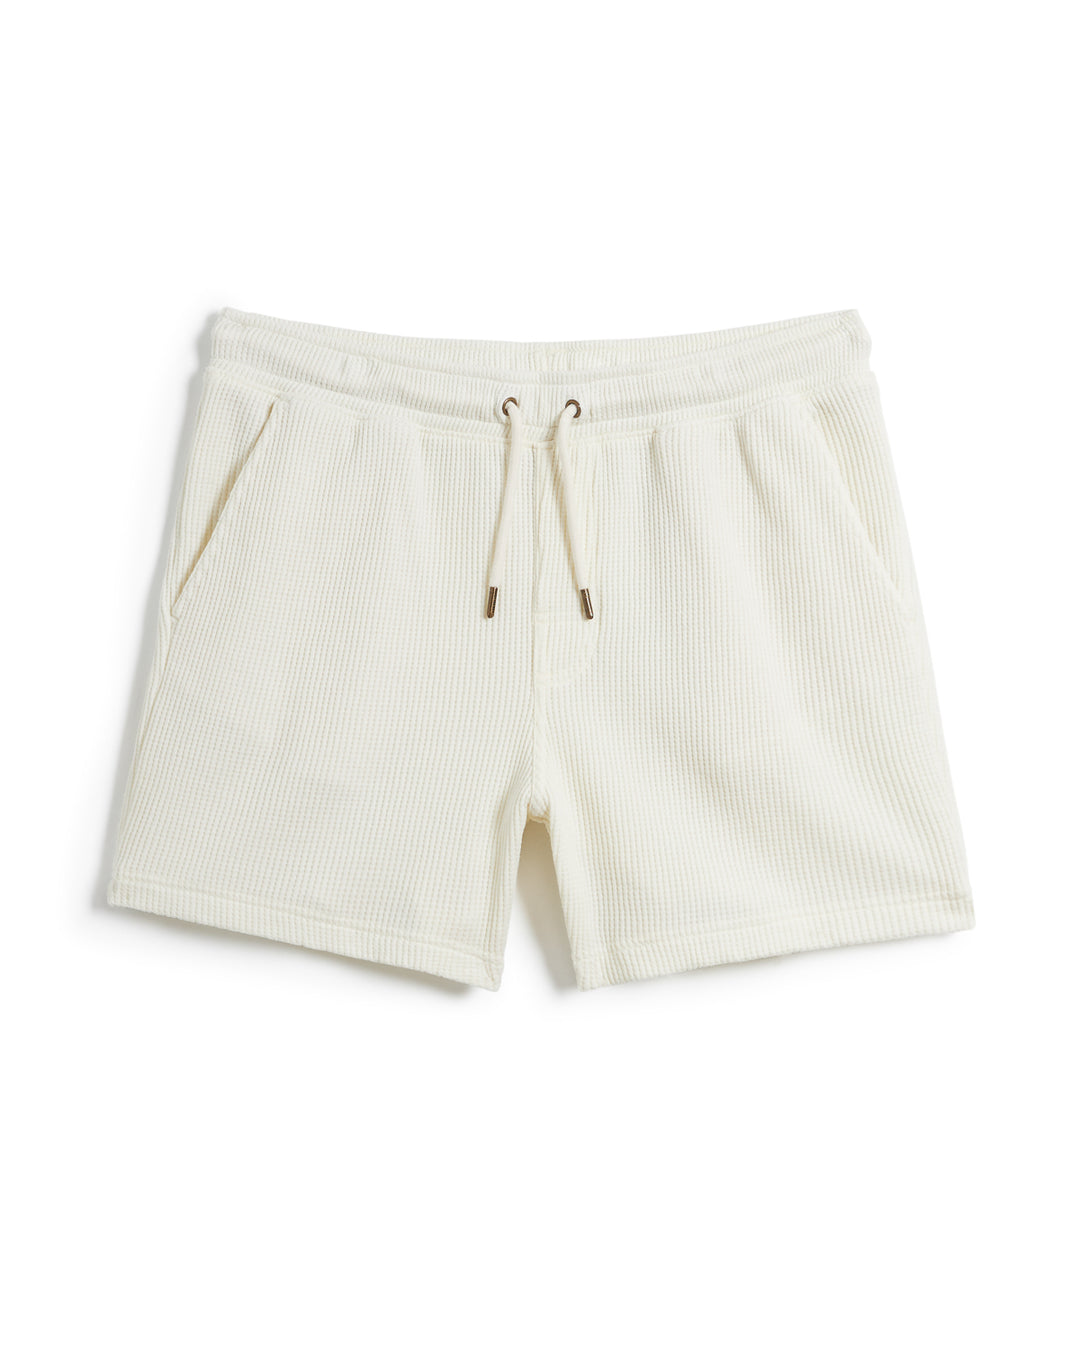 A pair of white Cannes shorts featuring an elastic waistband and a subtle striped texture, made from waffle knit fabric, displayed against a plain white background, is the **The Cannes Waffle Knit Shorts - Vintage Ivory** by **Dandy Del Mar**.